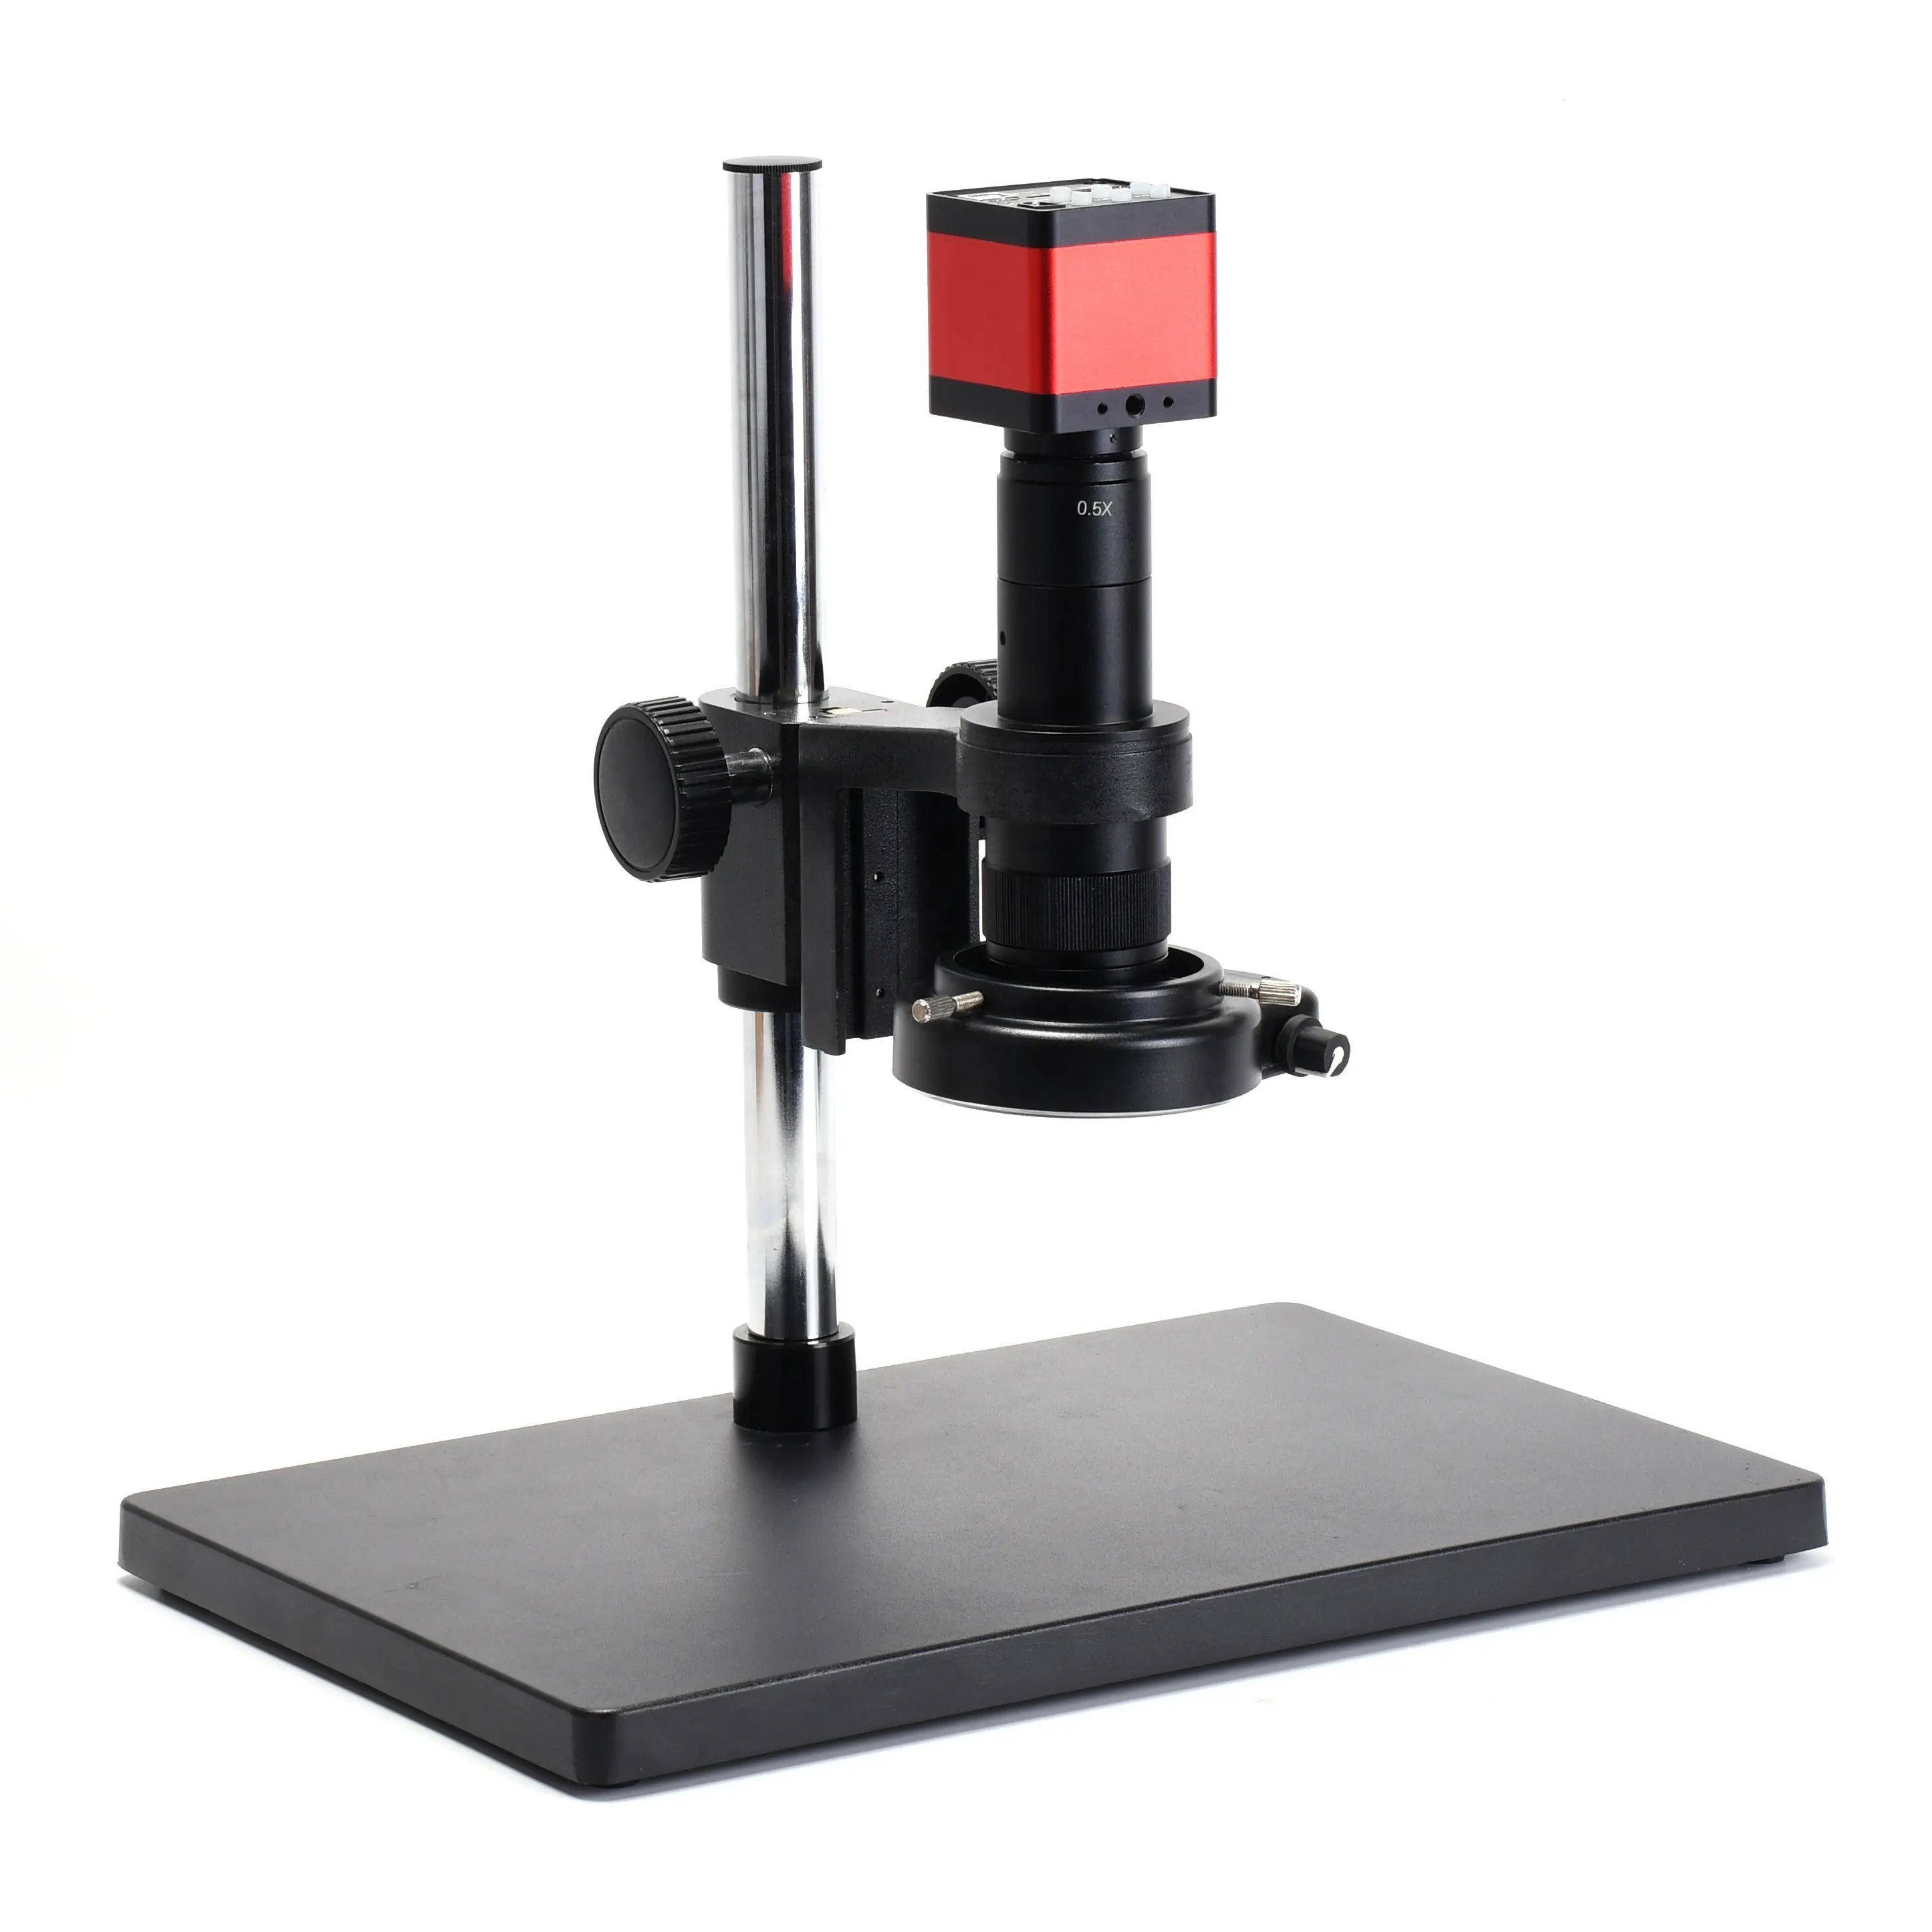 48MP 1080P 60FPS HDMI-Compatible USB Digital Industry Microscope Camera with Stereo Table Stand 180X C-MOUNT Lens 144 LED Light